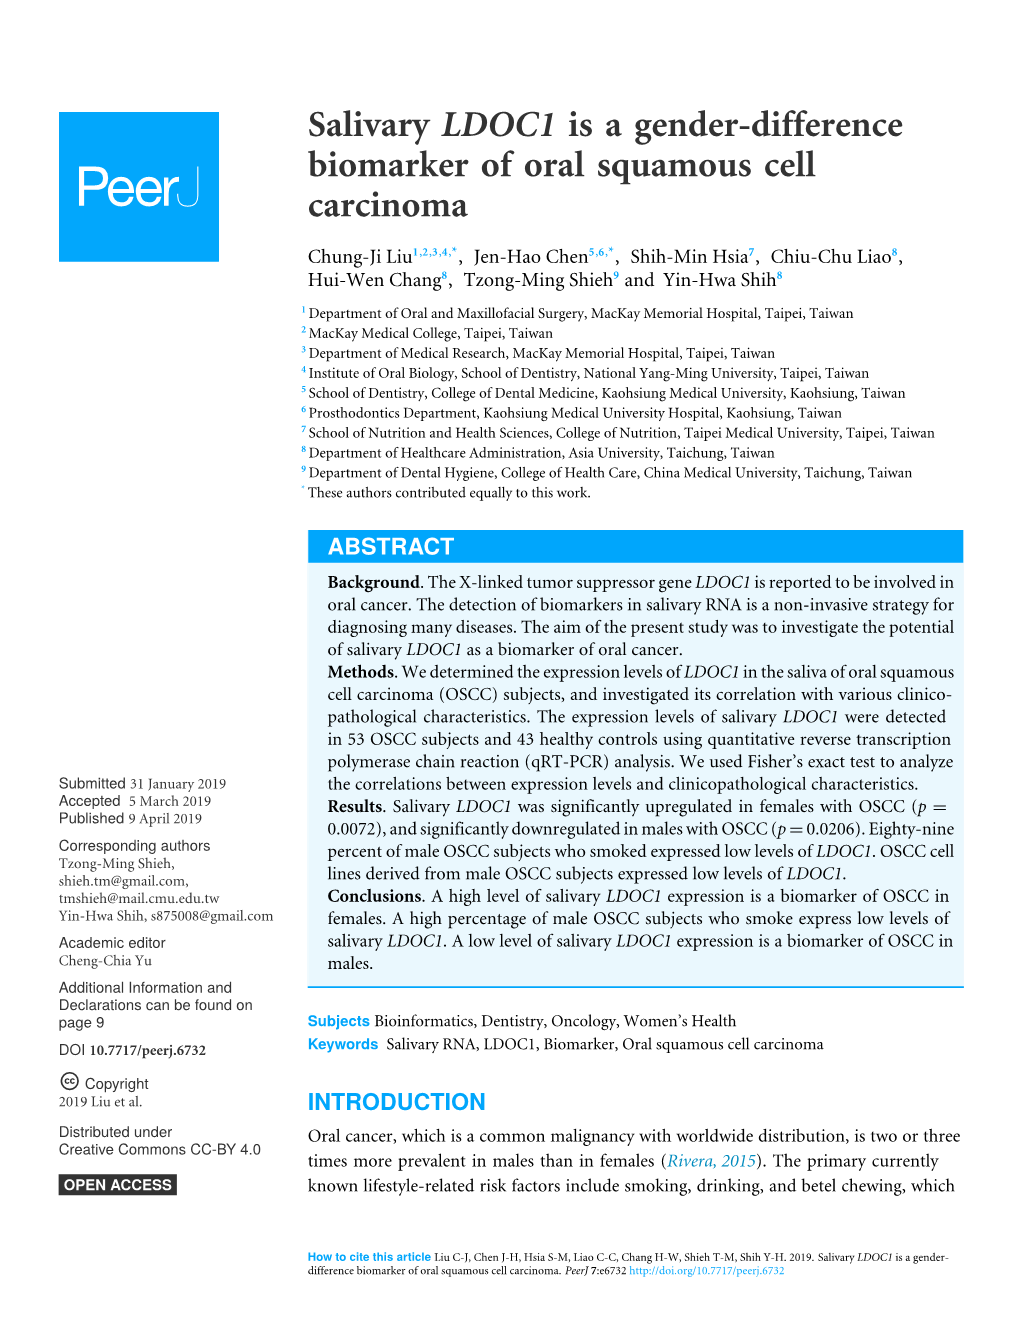 Salivary LDOC1 Is a Gender-Difference Biomarker of Oral Squamous Cell Carcinoma